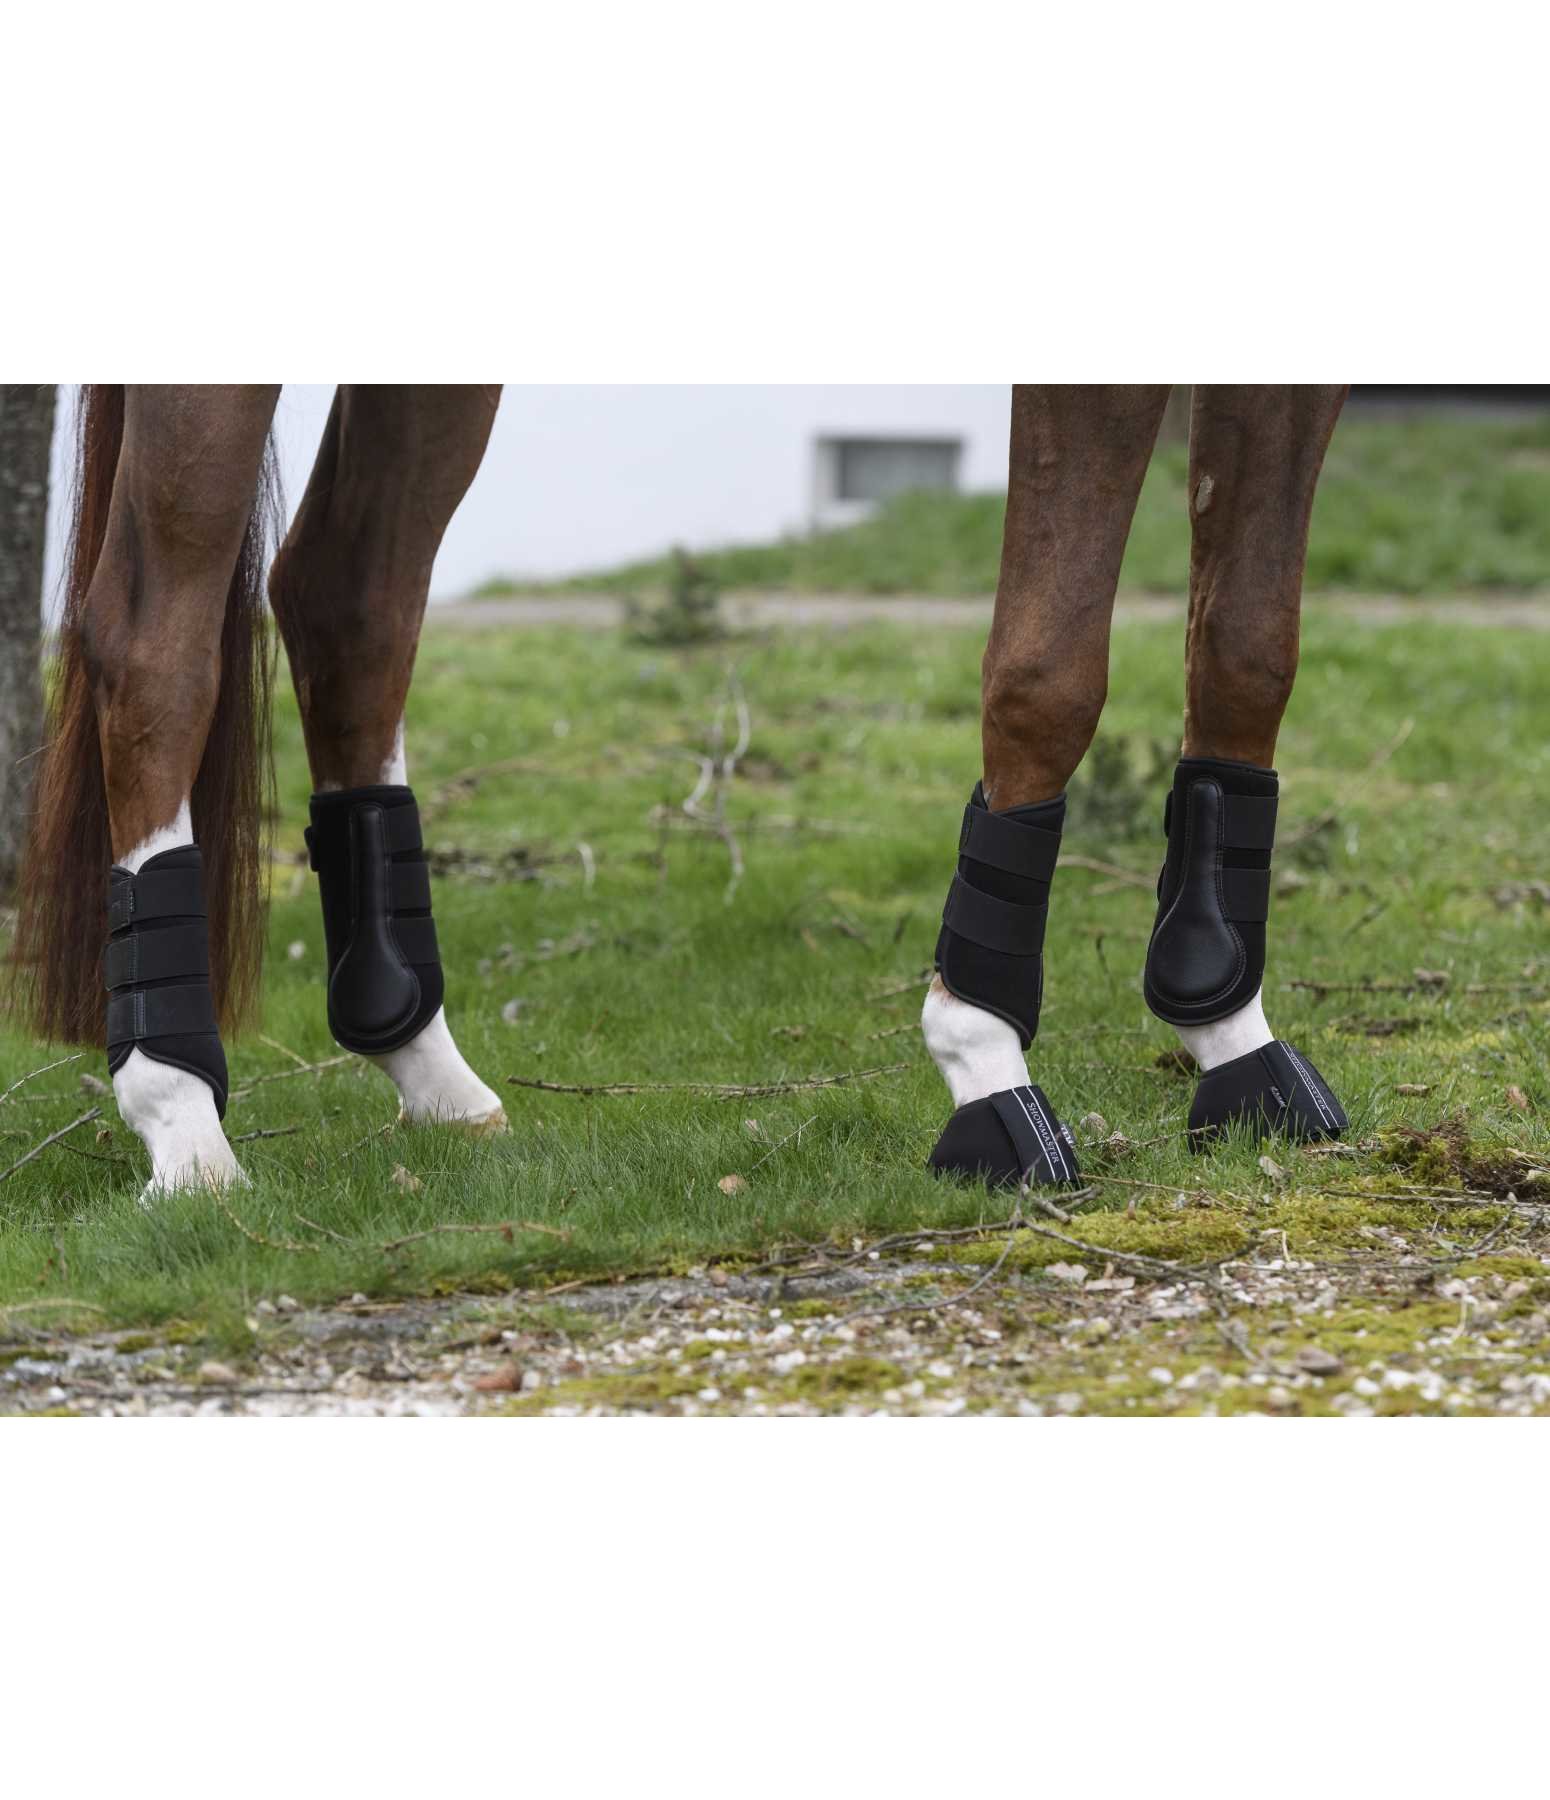 All-Day Training Boots, hind legs